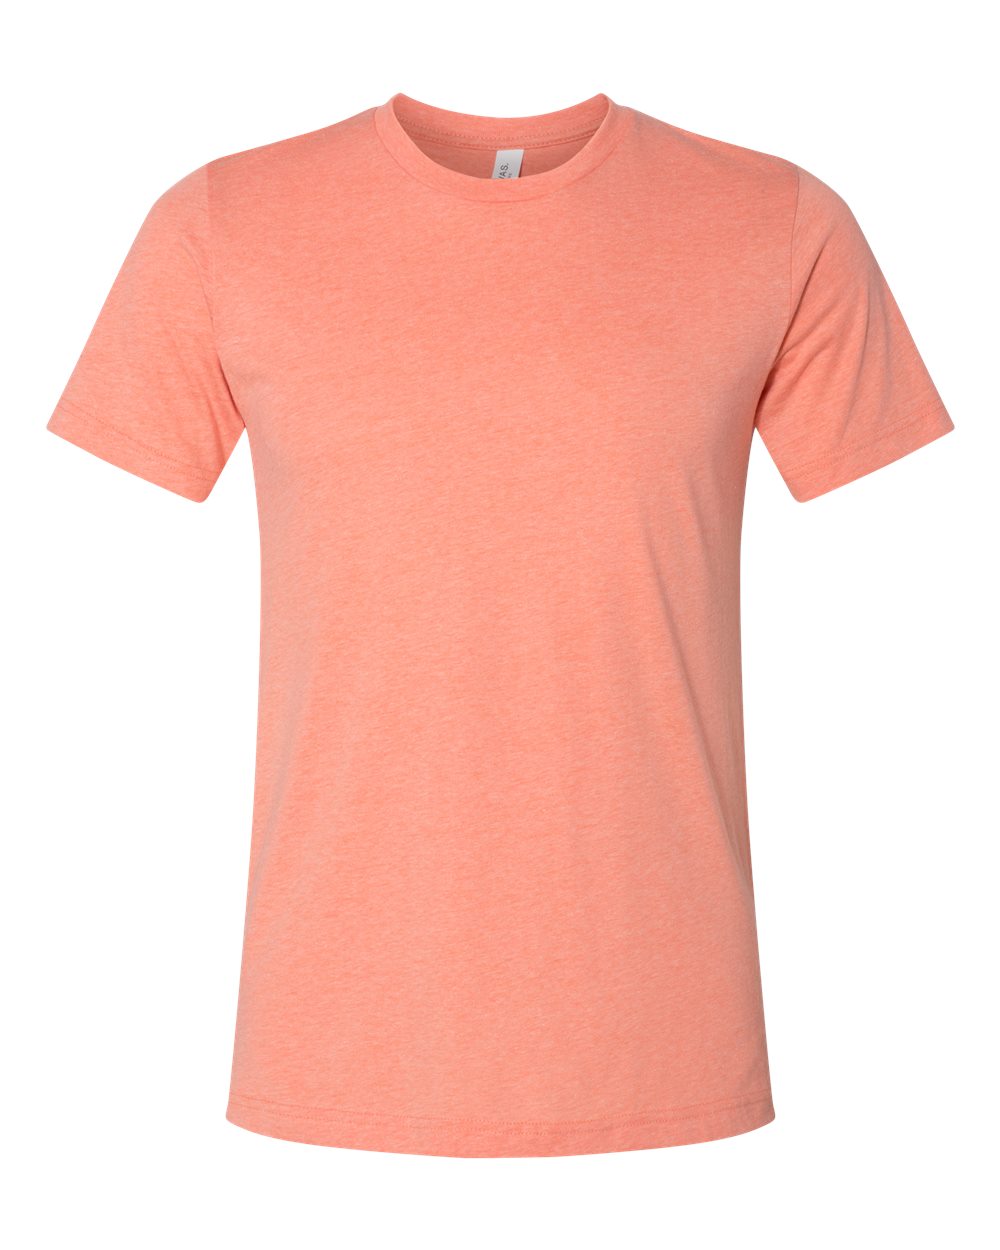 Game Changer Therapy Services Short Sleeve Tee - SUMMER COLORS!